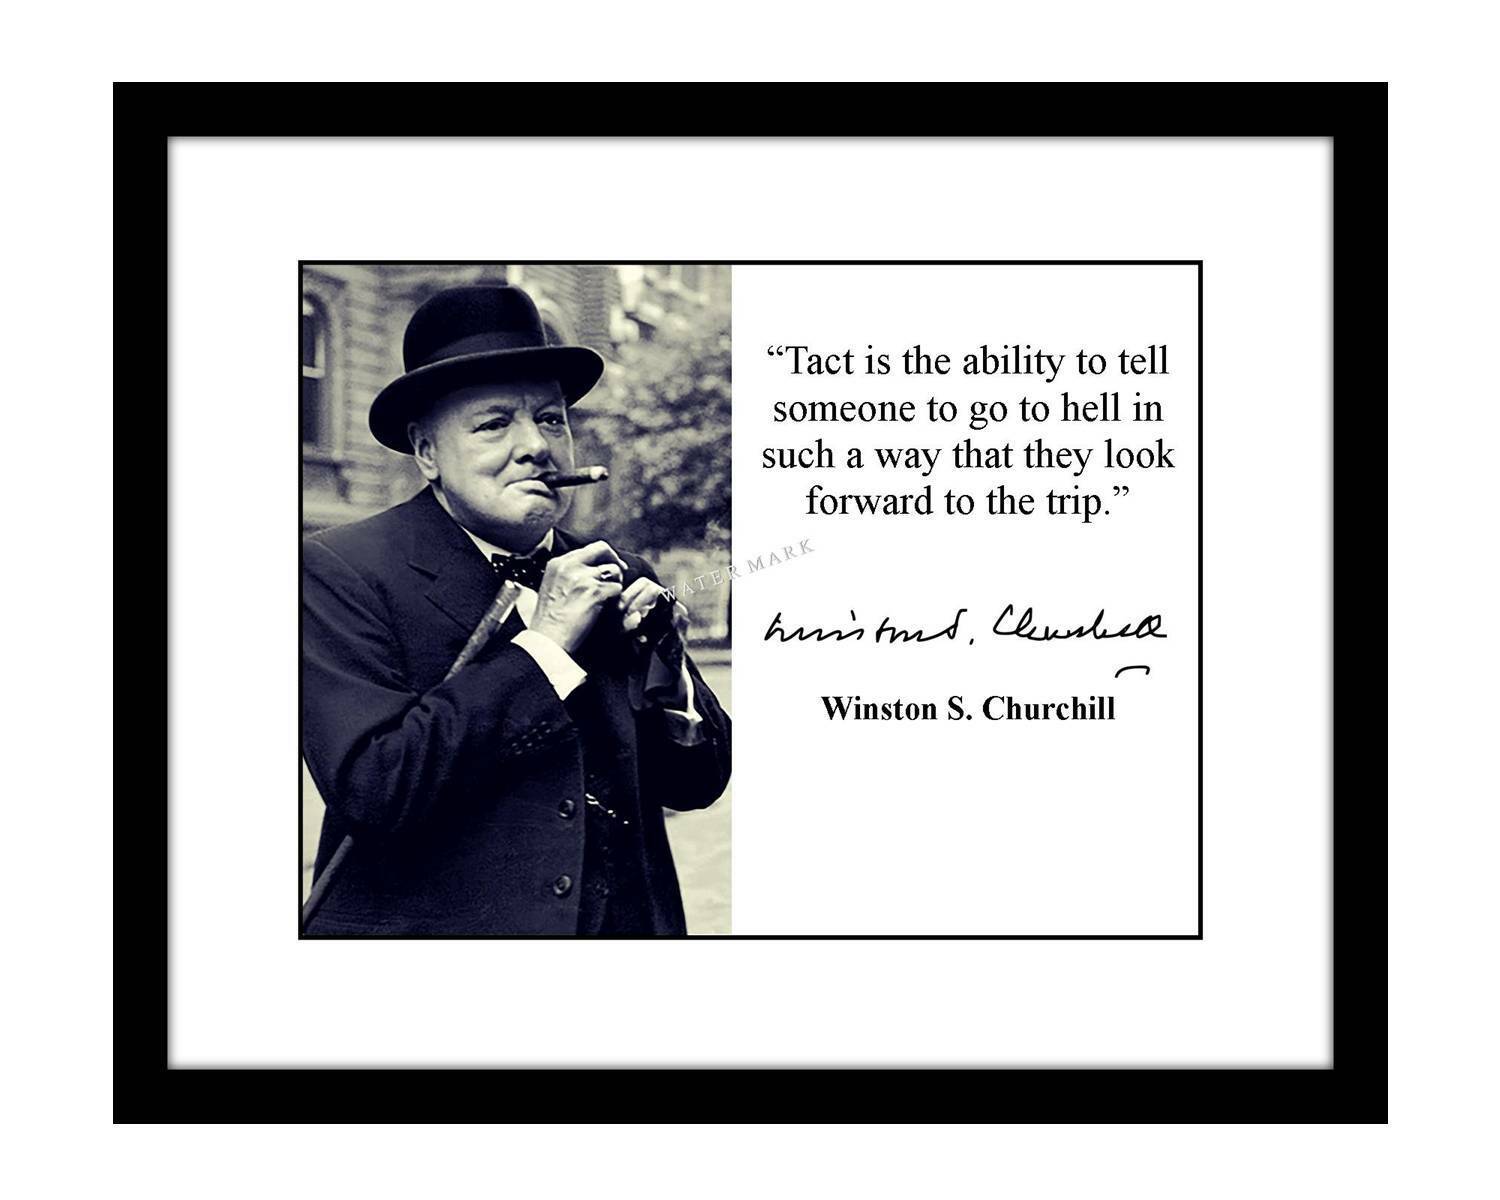 Winston Churchill 8x10 Signed photo print go to hell tact Quote WWII war 